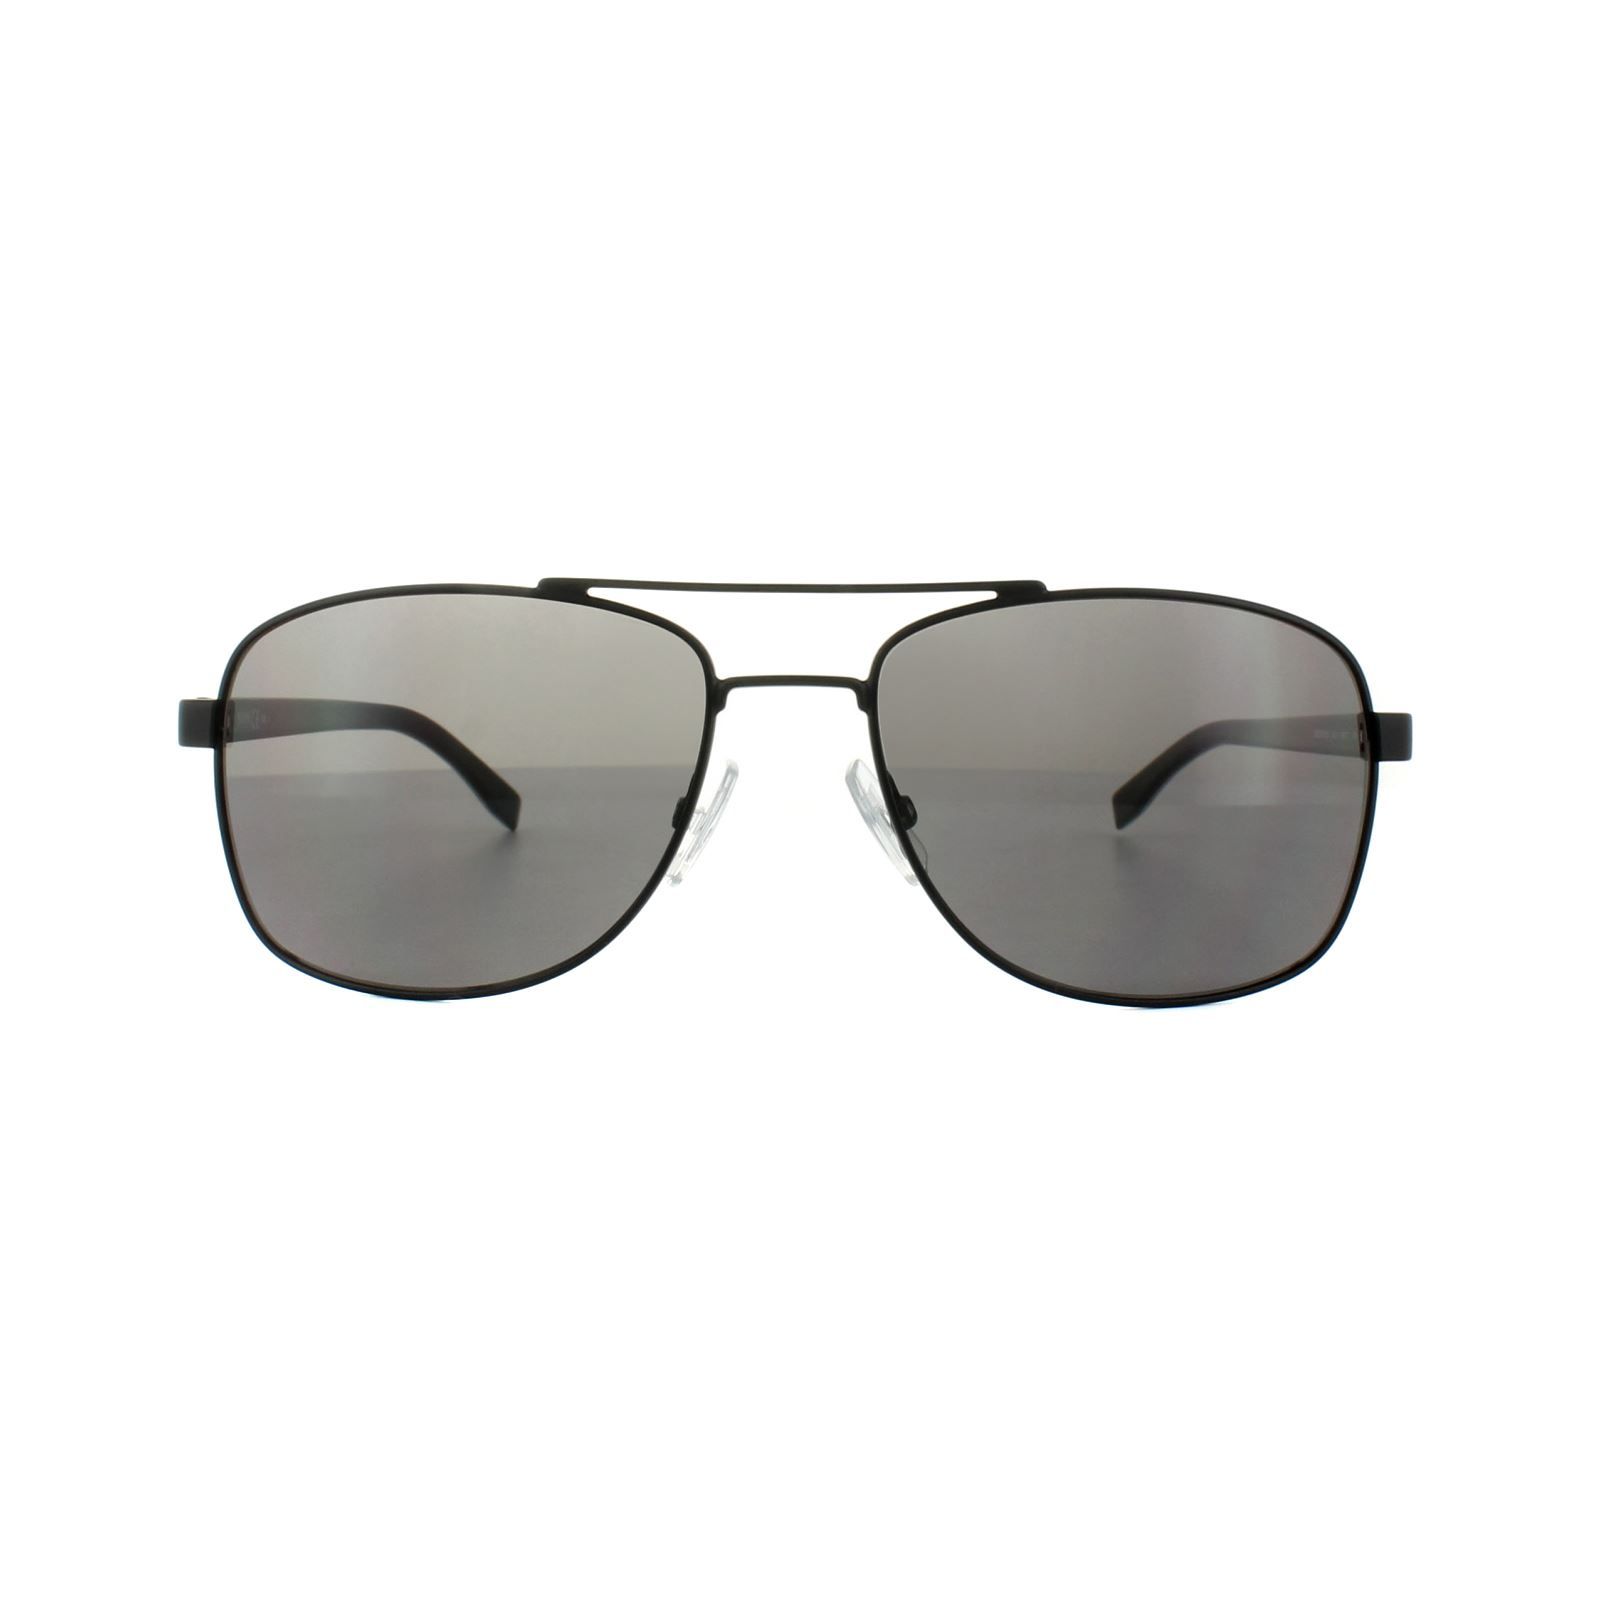 Hugo Boss Sunglasses 0762/S QIL Y1 Matt Black Grey are a smaller aviator style with classic double bridge and timeless appeal. The Hugo Boss logo appears in contrasting colour on the temple.